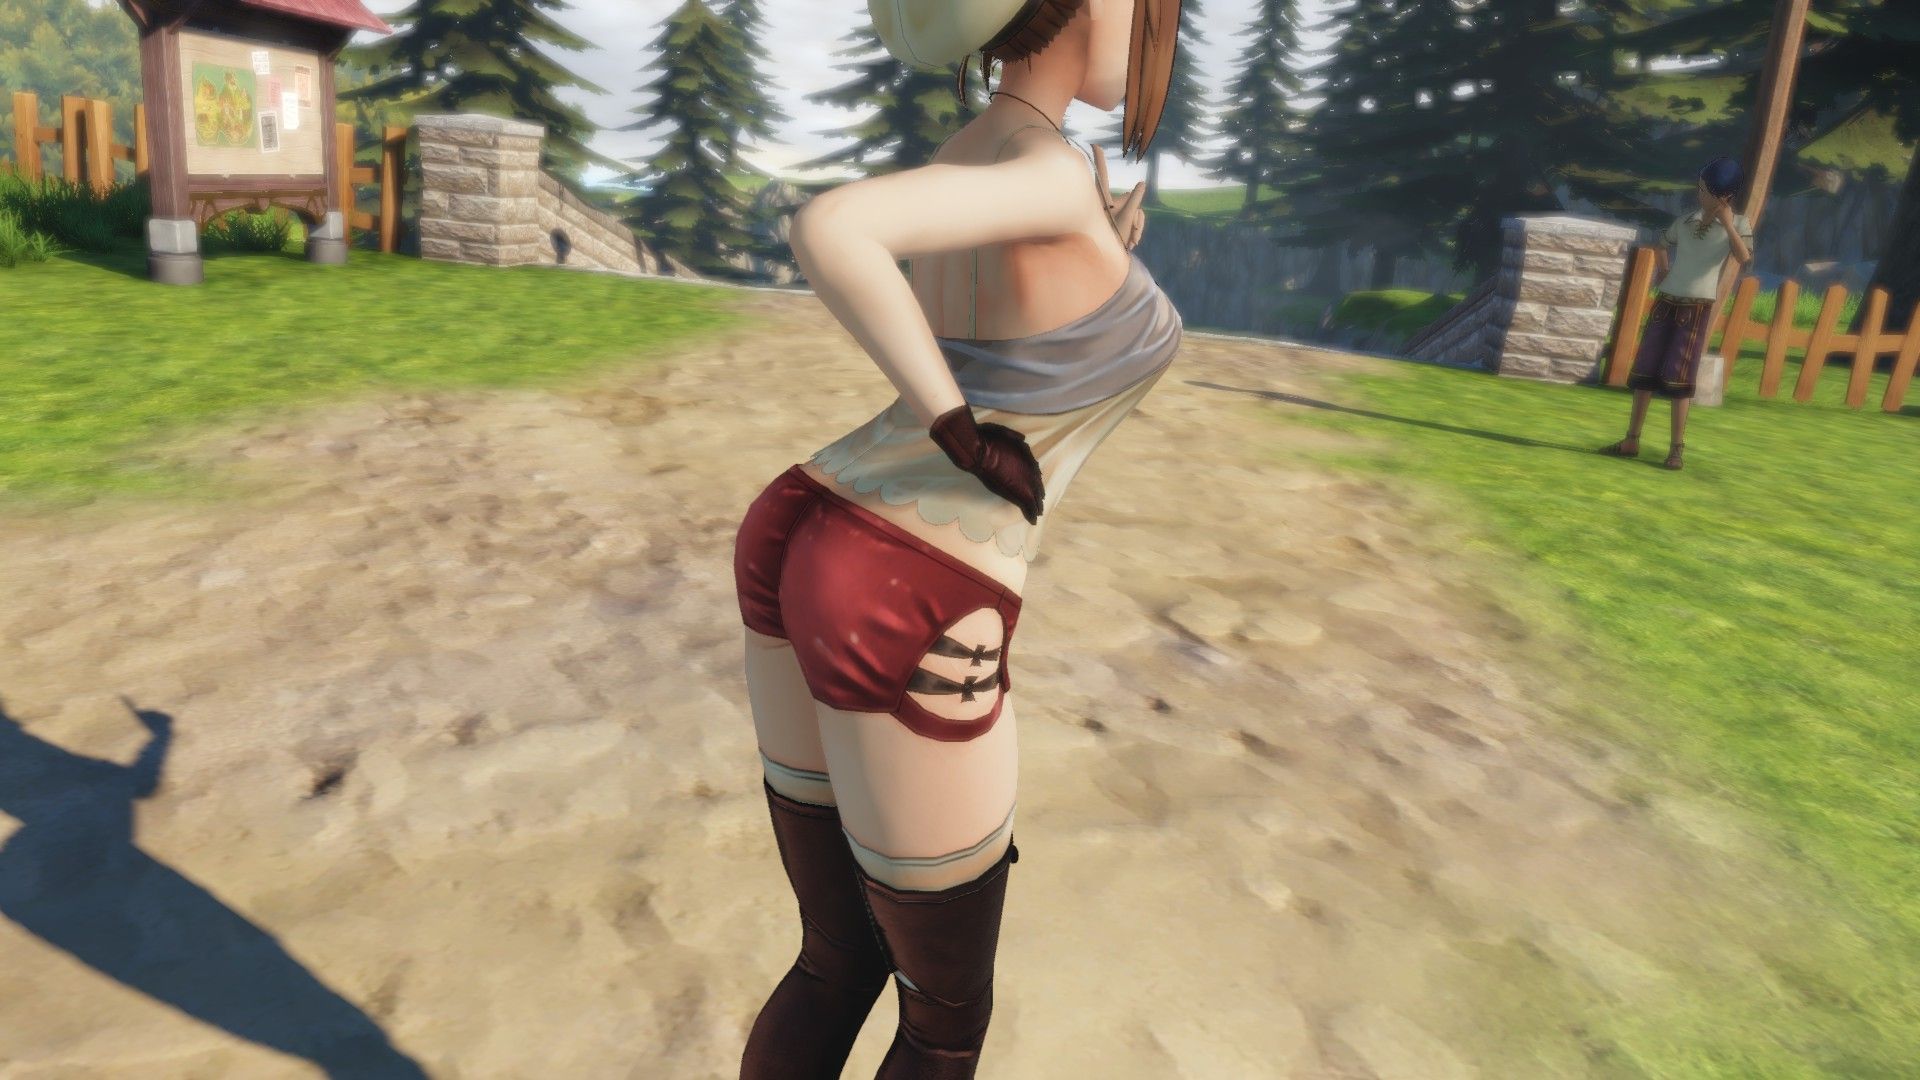 Buy a PC version liza atelier but also spend 2 days to make nipples transparent with erotic MOD ... 12